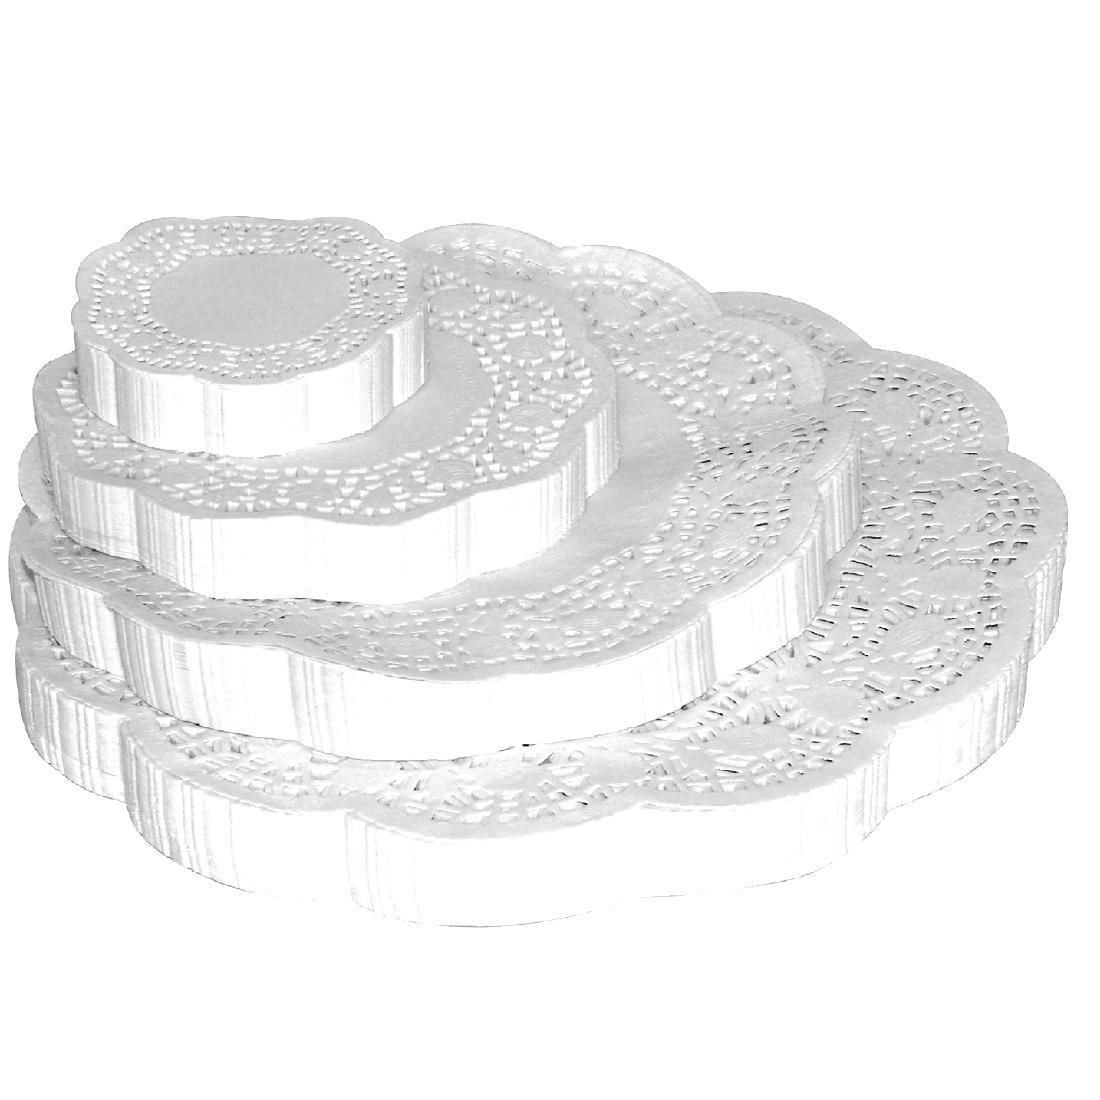 Fiesta Round Paper Doilies 165mm (Pack of 250) - CE991  - 2